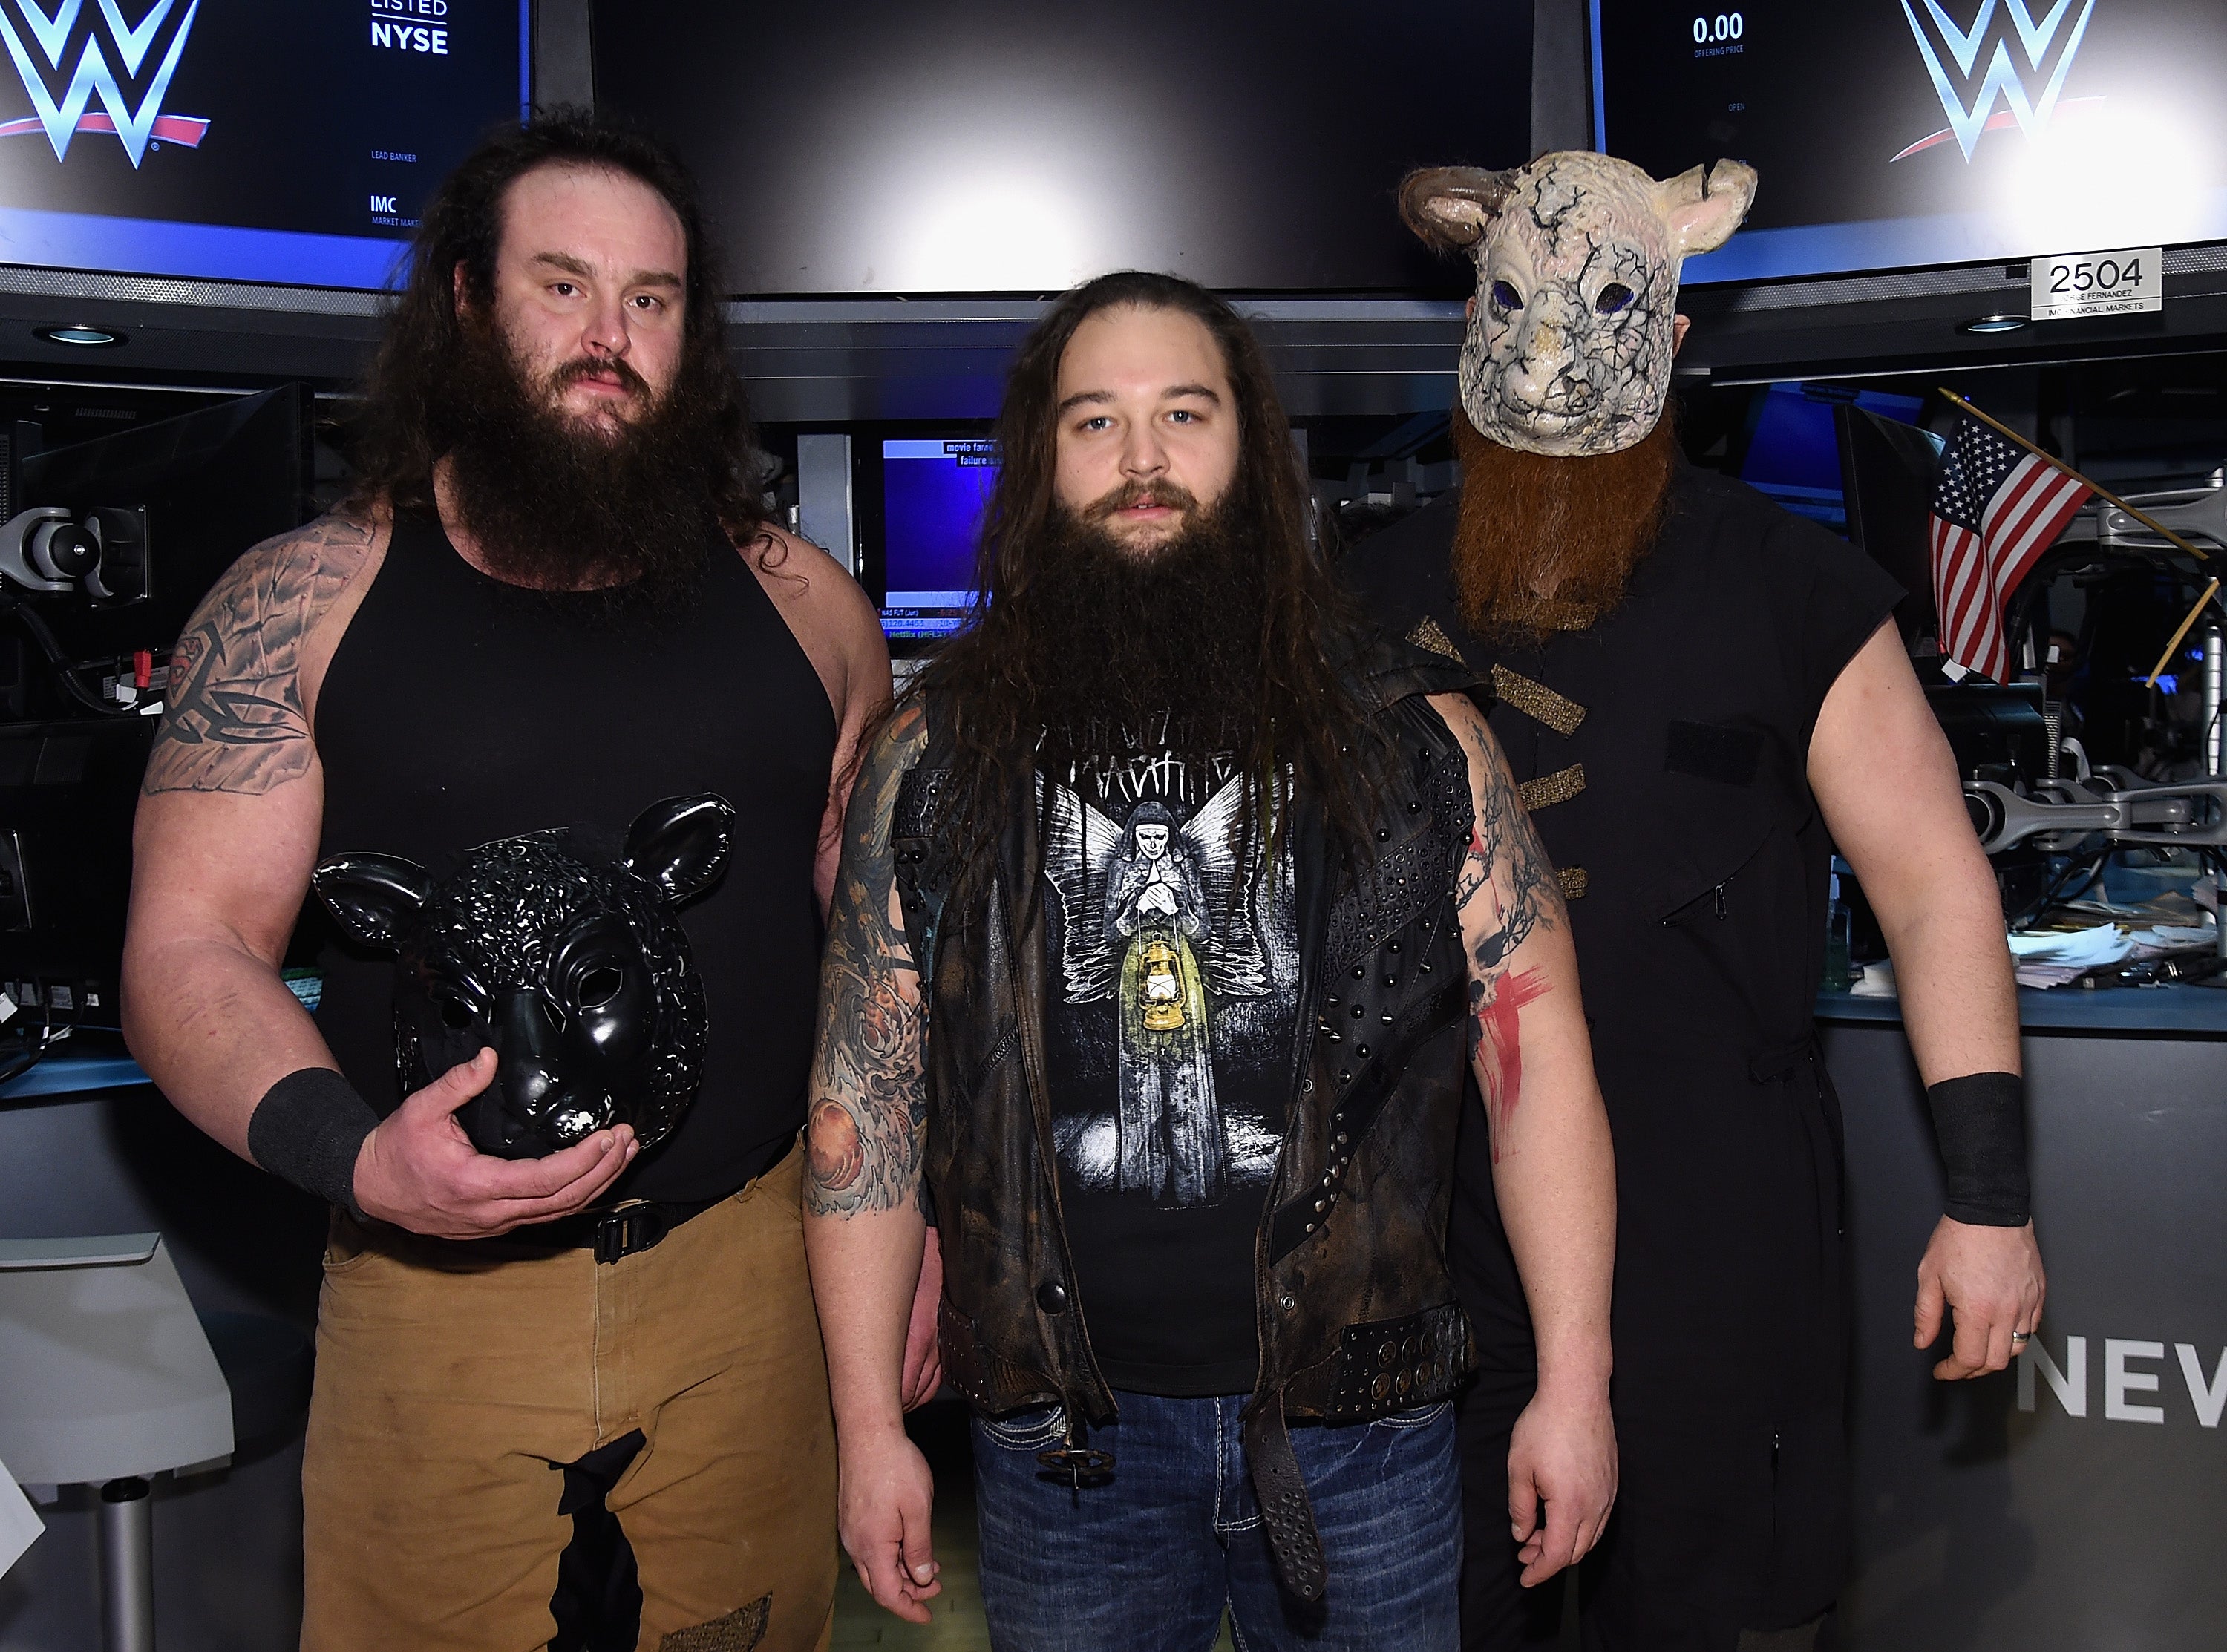 Bray Wyatt Legacy Collection: What is included in the Bray Wyatt Legacy  Collection? All you need to know about the merch